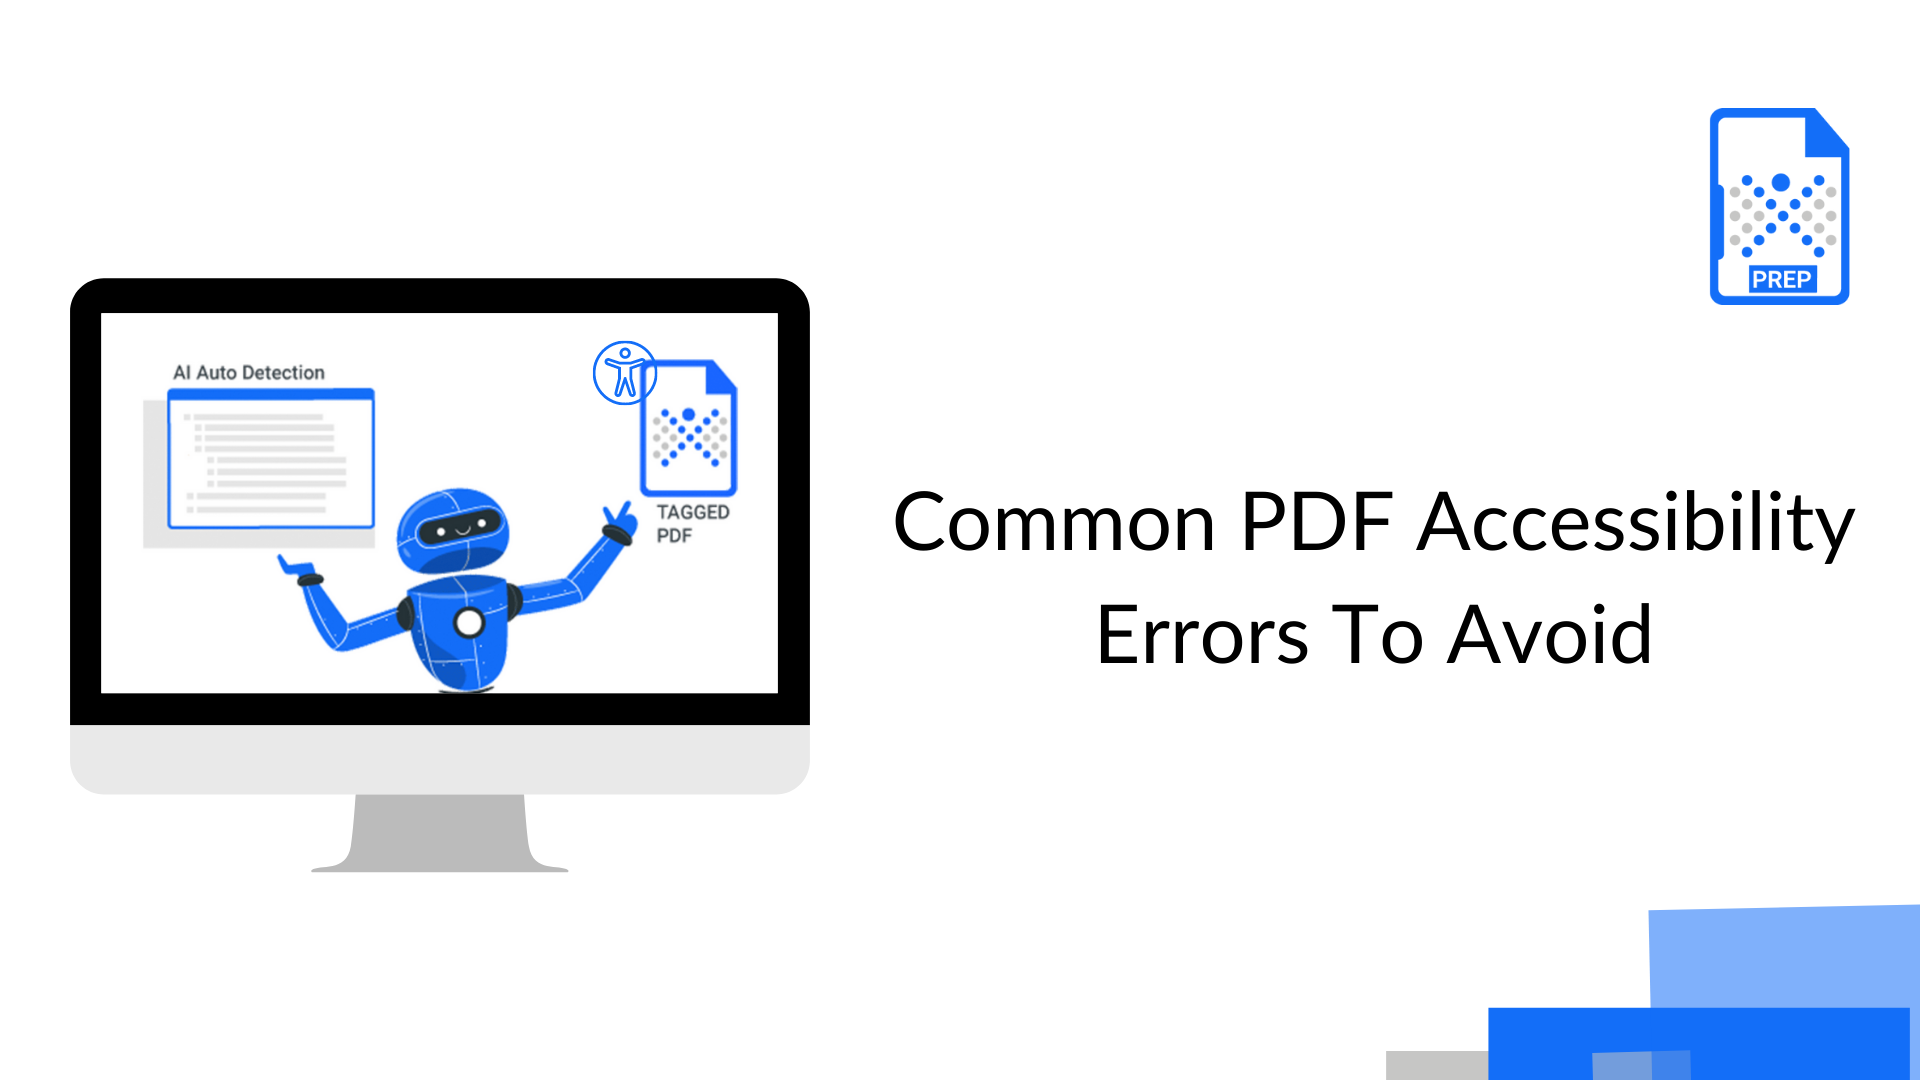 Common PDF Accessibility Errors to Avoid